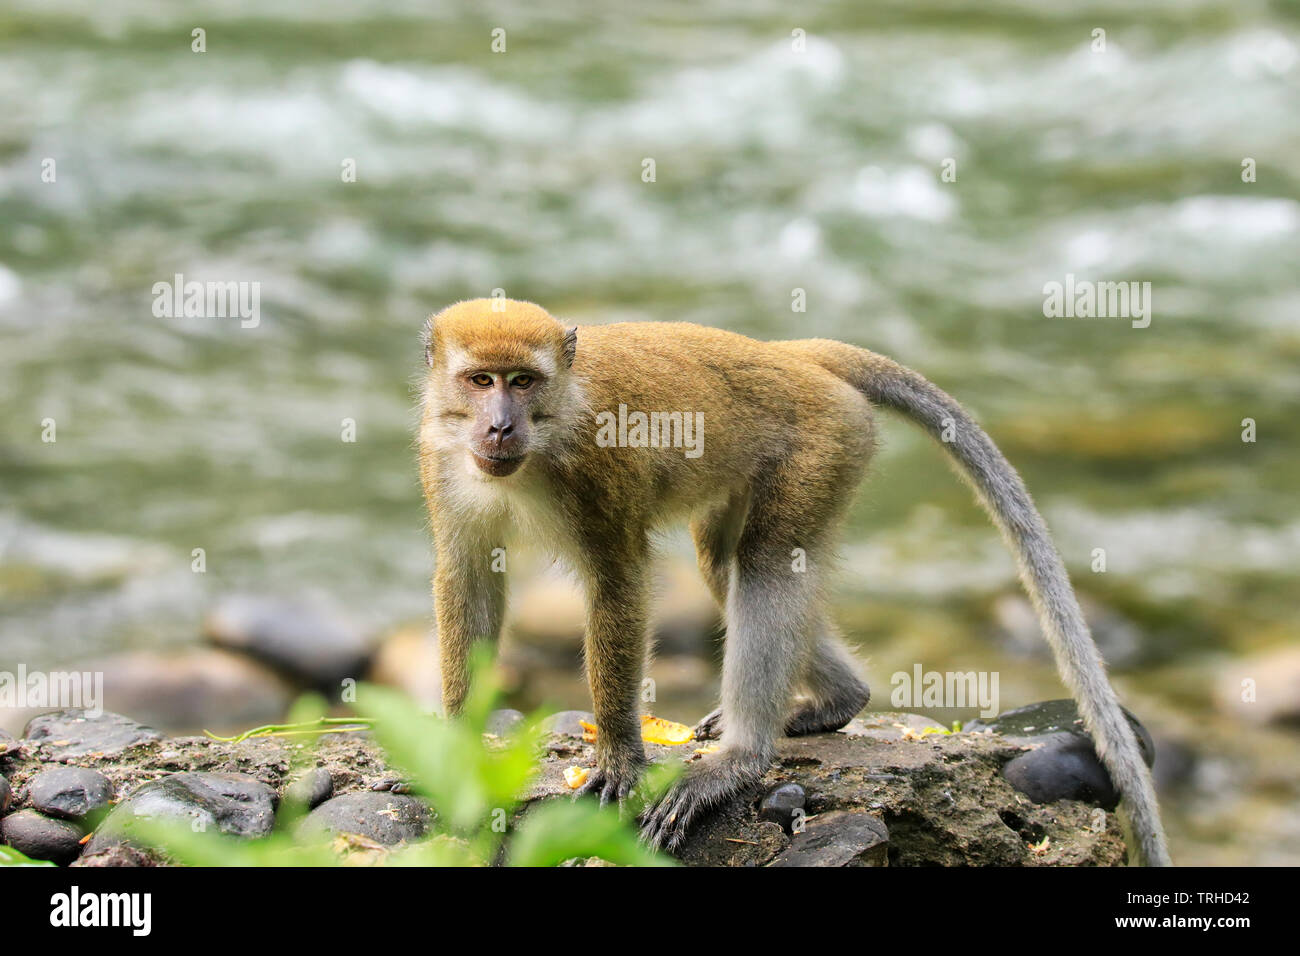 Crab-eating macaque (Macaca fascicularis) walking by the river in Bukit Lawang, Sumatra, Indonesia. This macaque is native to Southeast Asia. Stock Photo